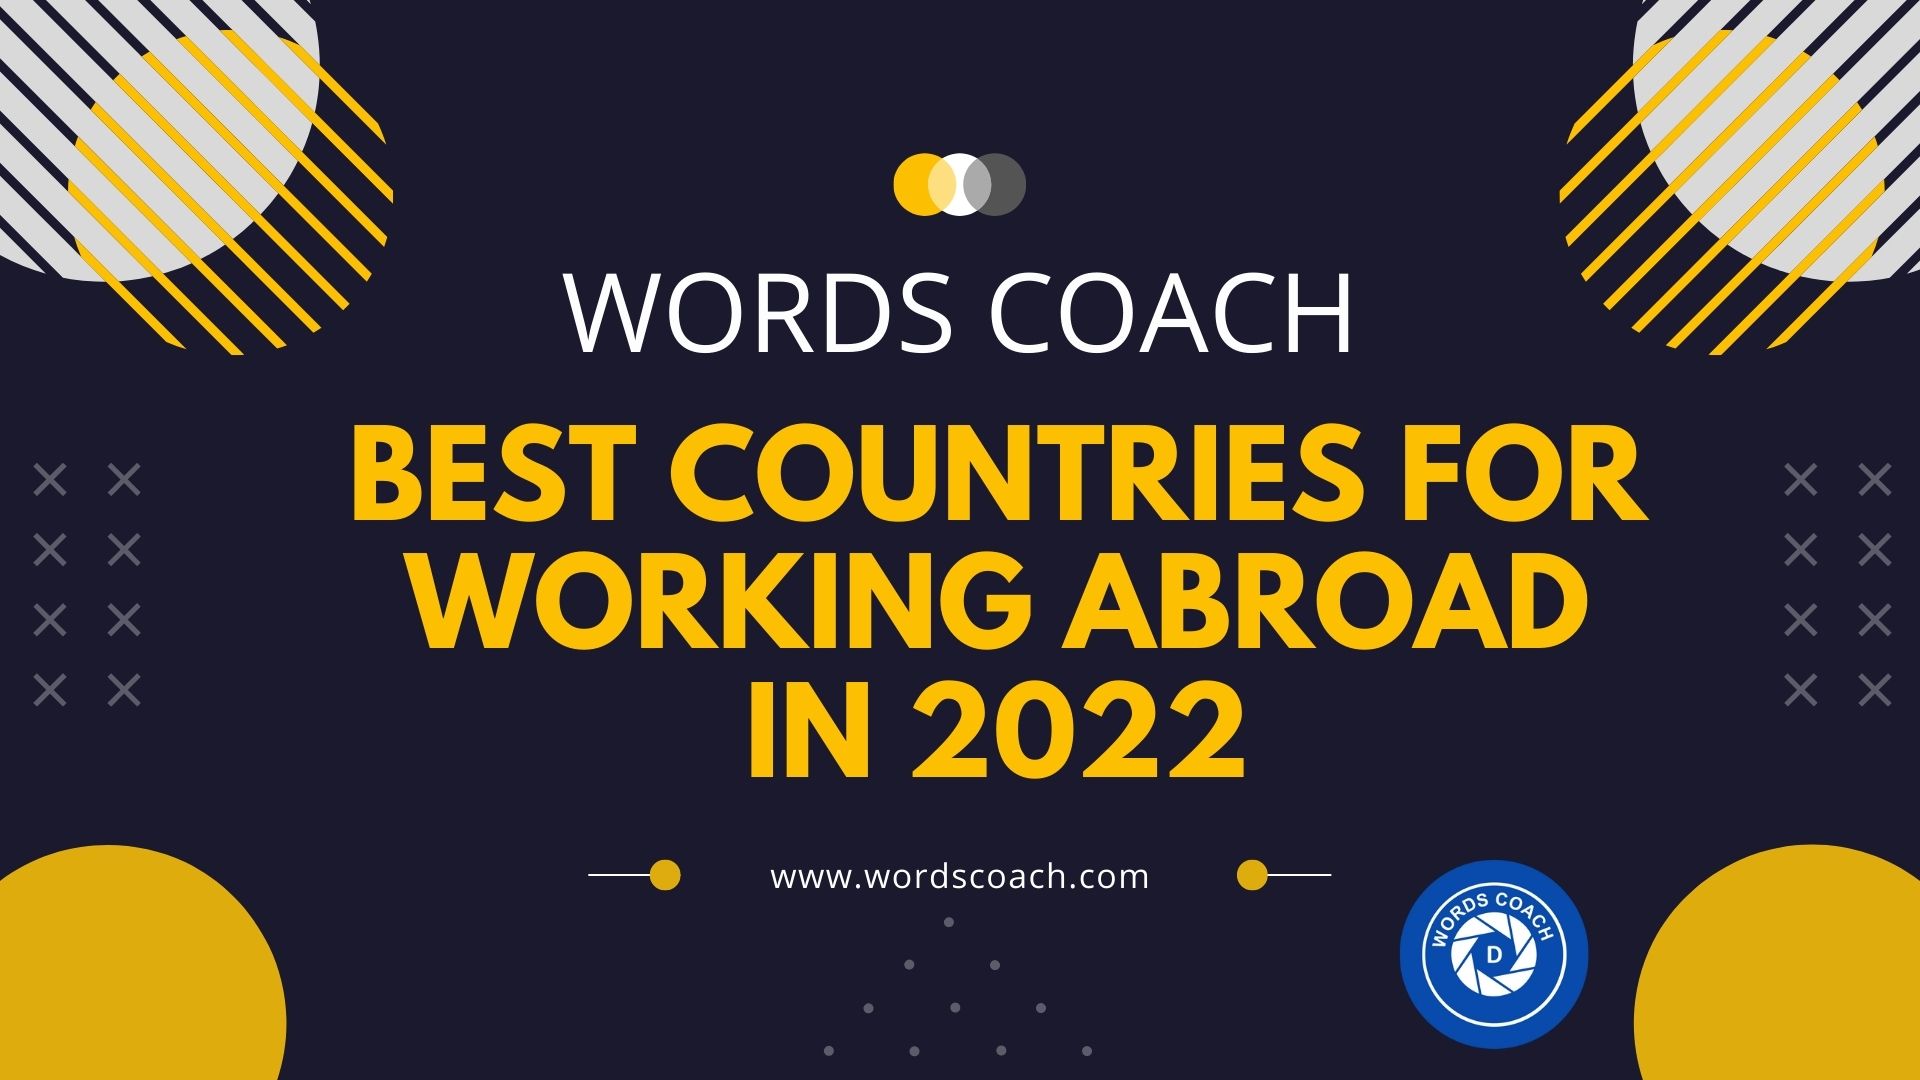 Best countries for working abroad in 2022